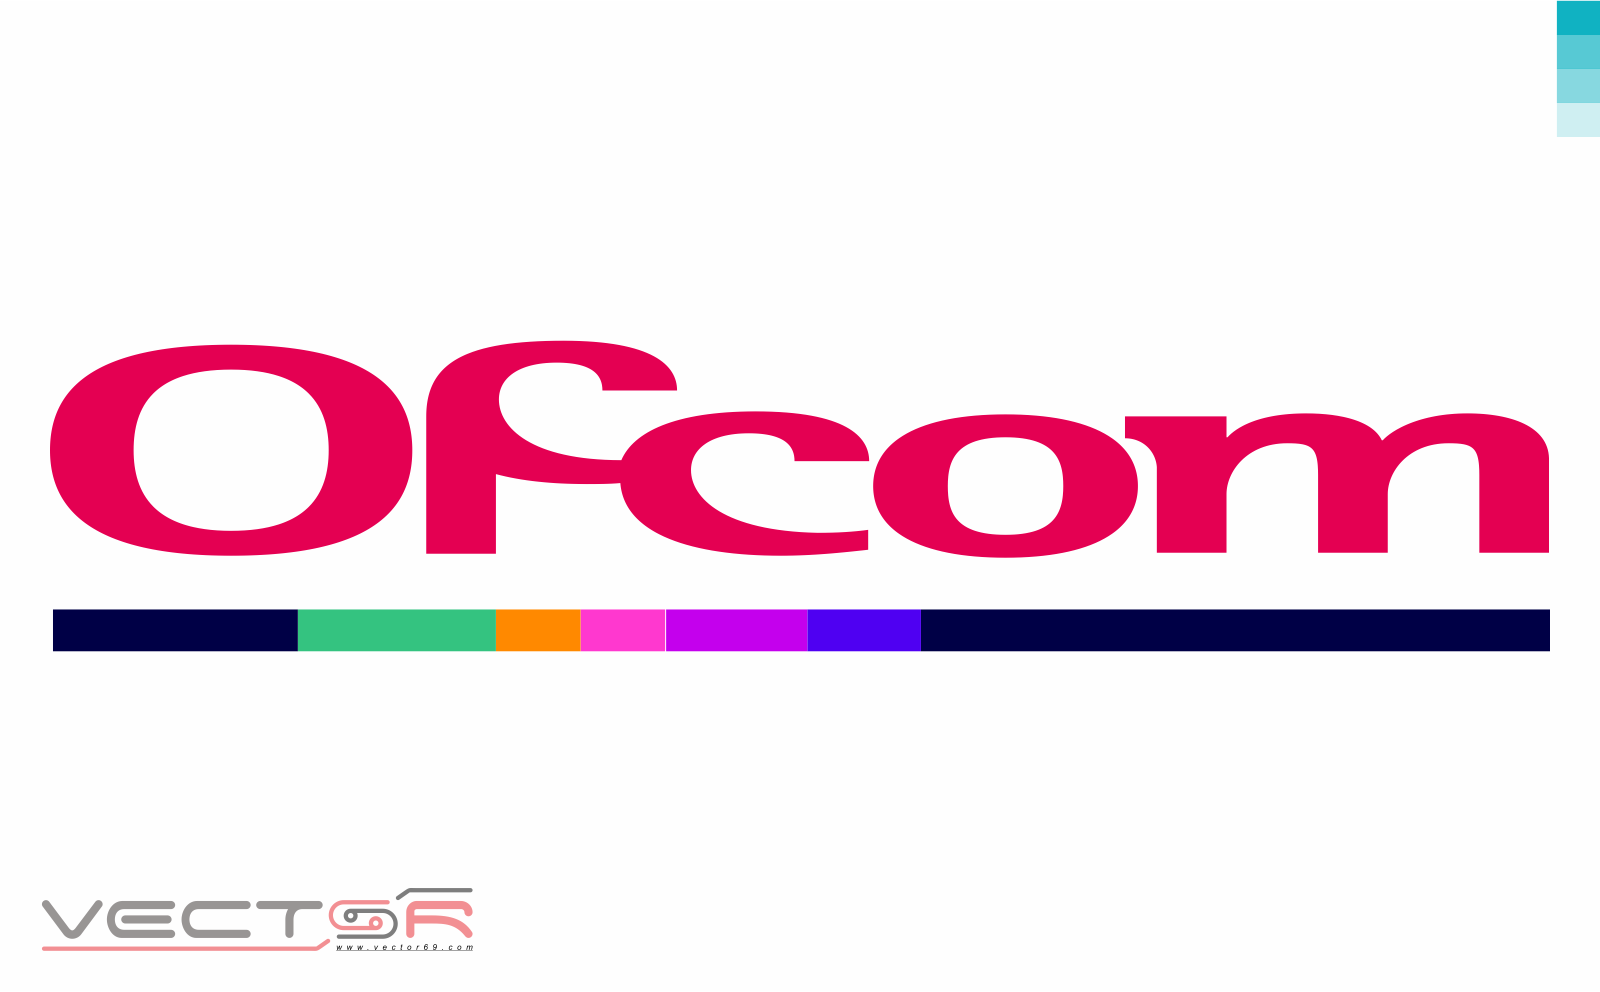 Ofcom Logo - Download Vector File SVG (Scalable Vector Graphics)